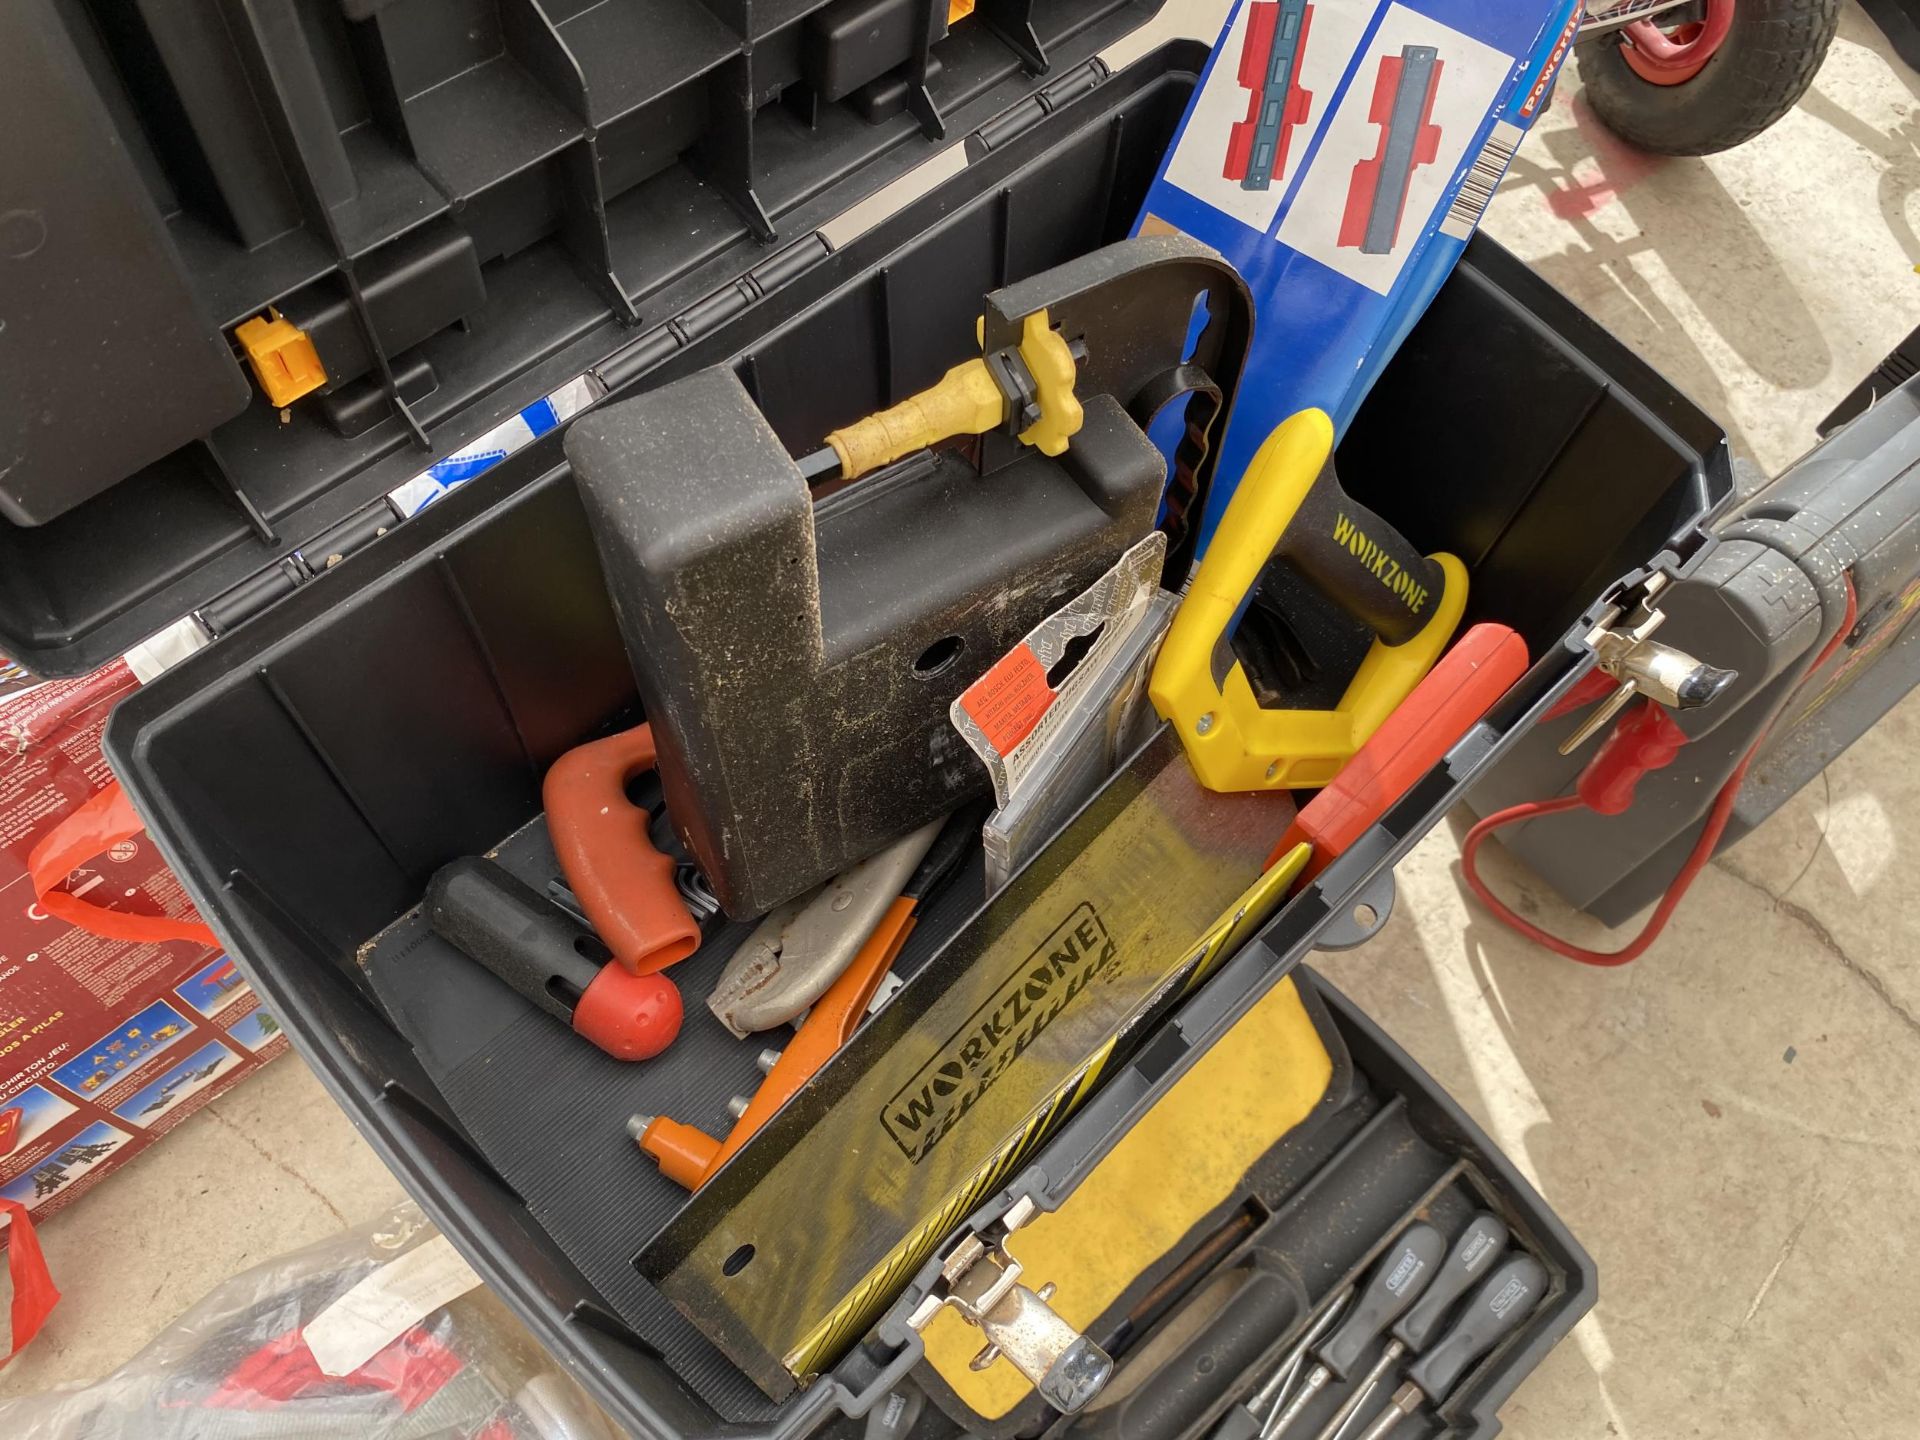 A TWO TIER MOBILE WORK CENTER WITH AN ASSORTMENT OF TOOLS TO INCLUDE SCREW DRIVERS AND SAWS - Image 2 of 3